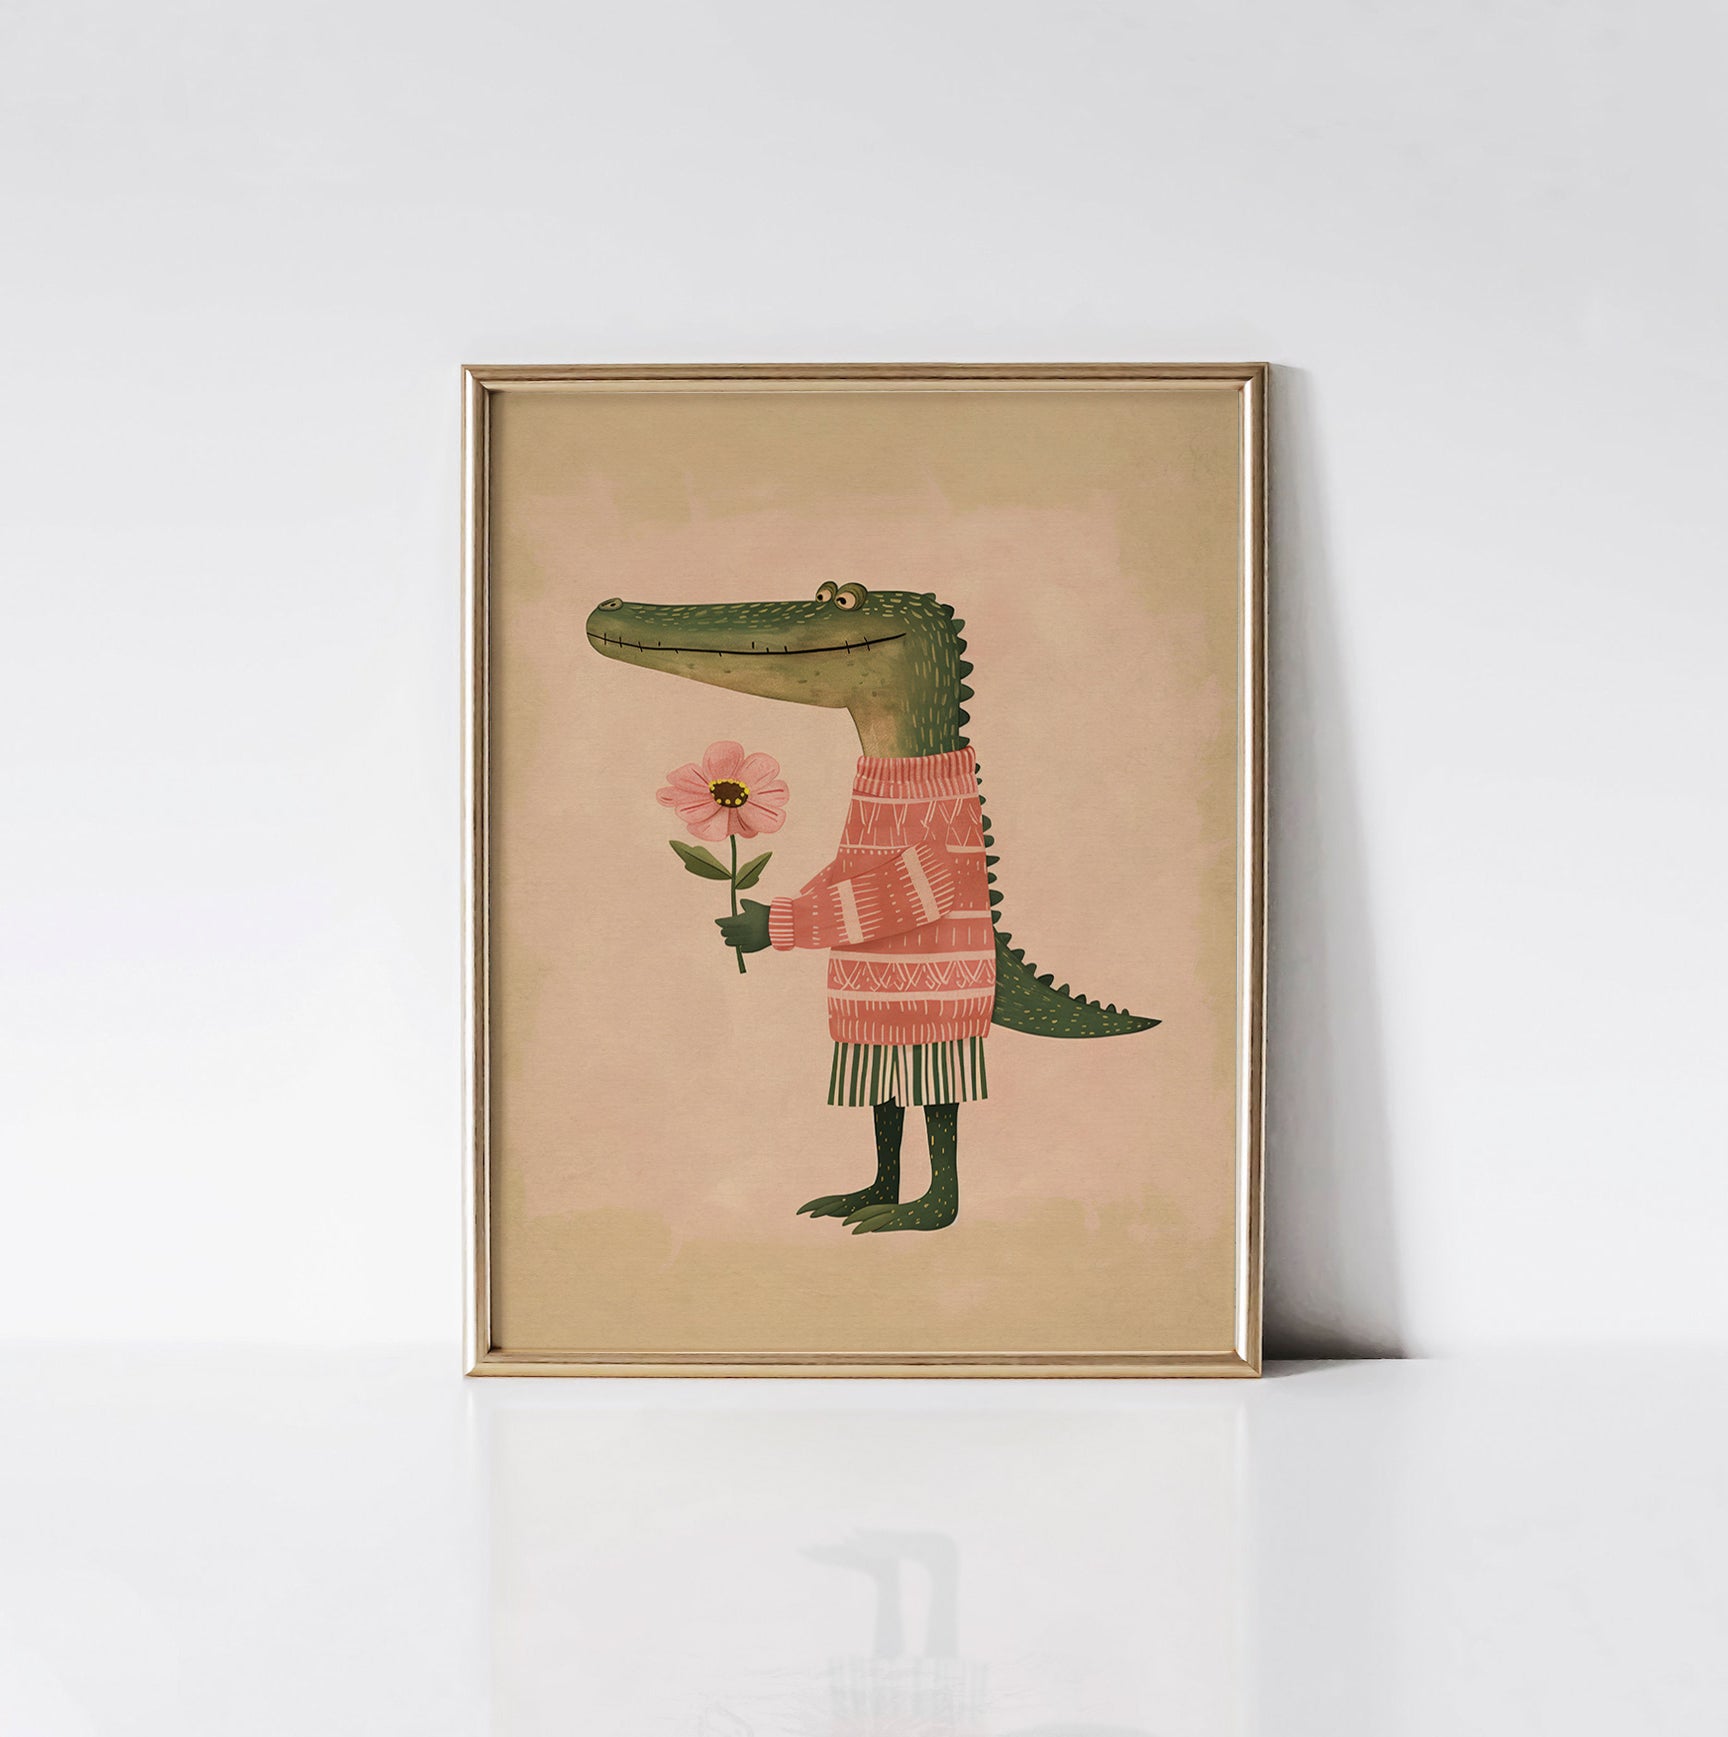 The 'Gentle Gator Blooms' art print displayed in a sleek gold frame, featuring a friendly alligator in a pink sweater holding a flower.